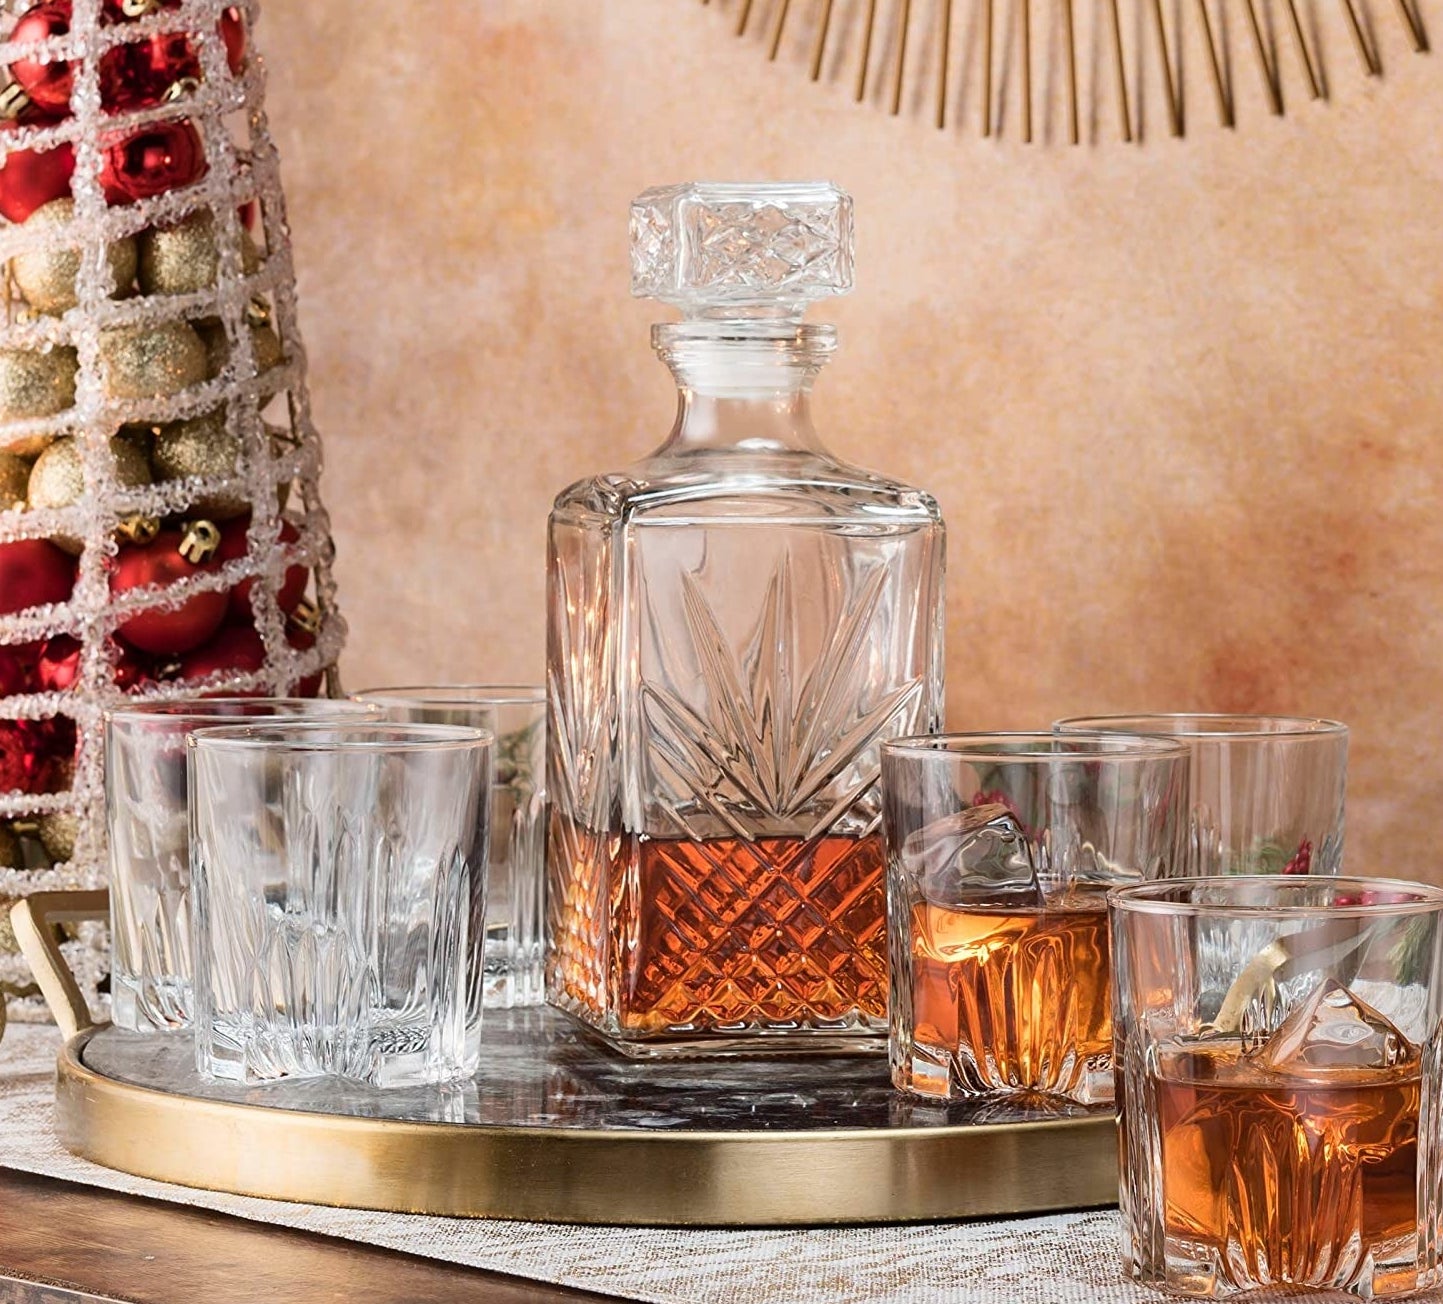 Six glasses beside a whisky decanter on a metallic tray